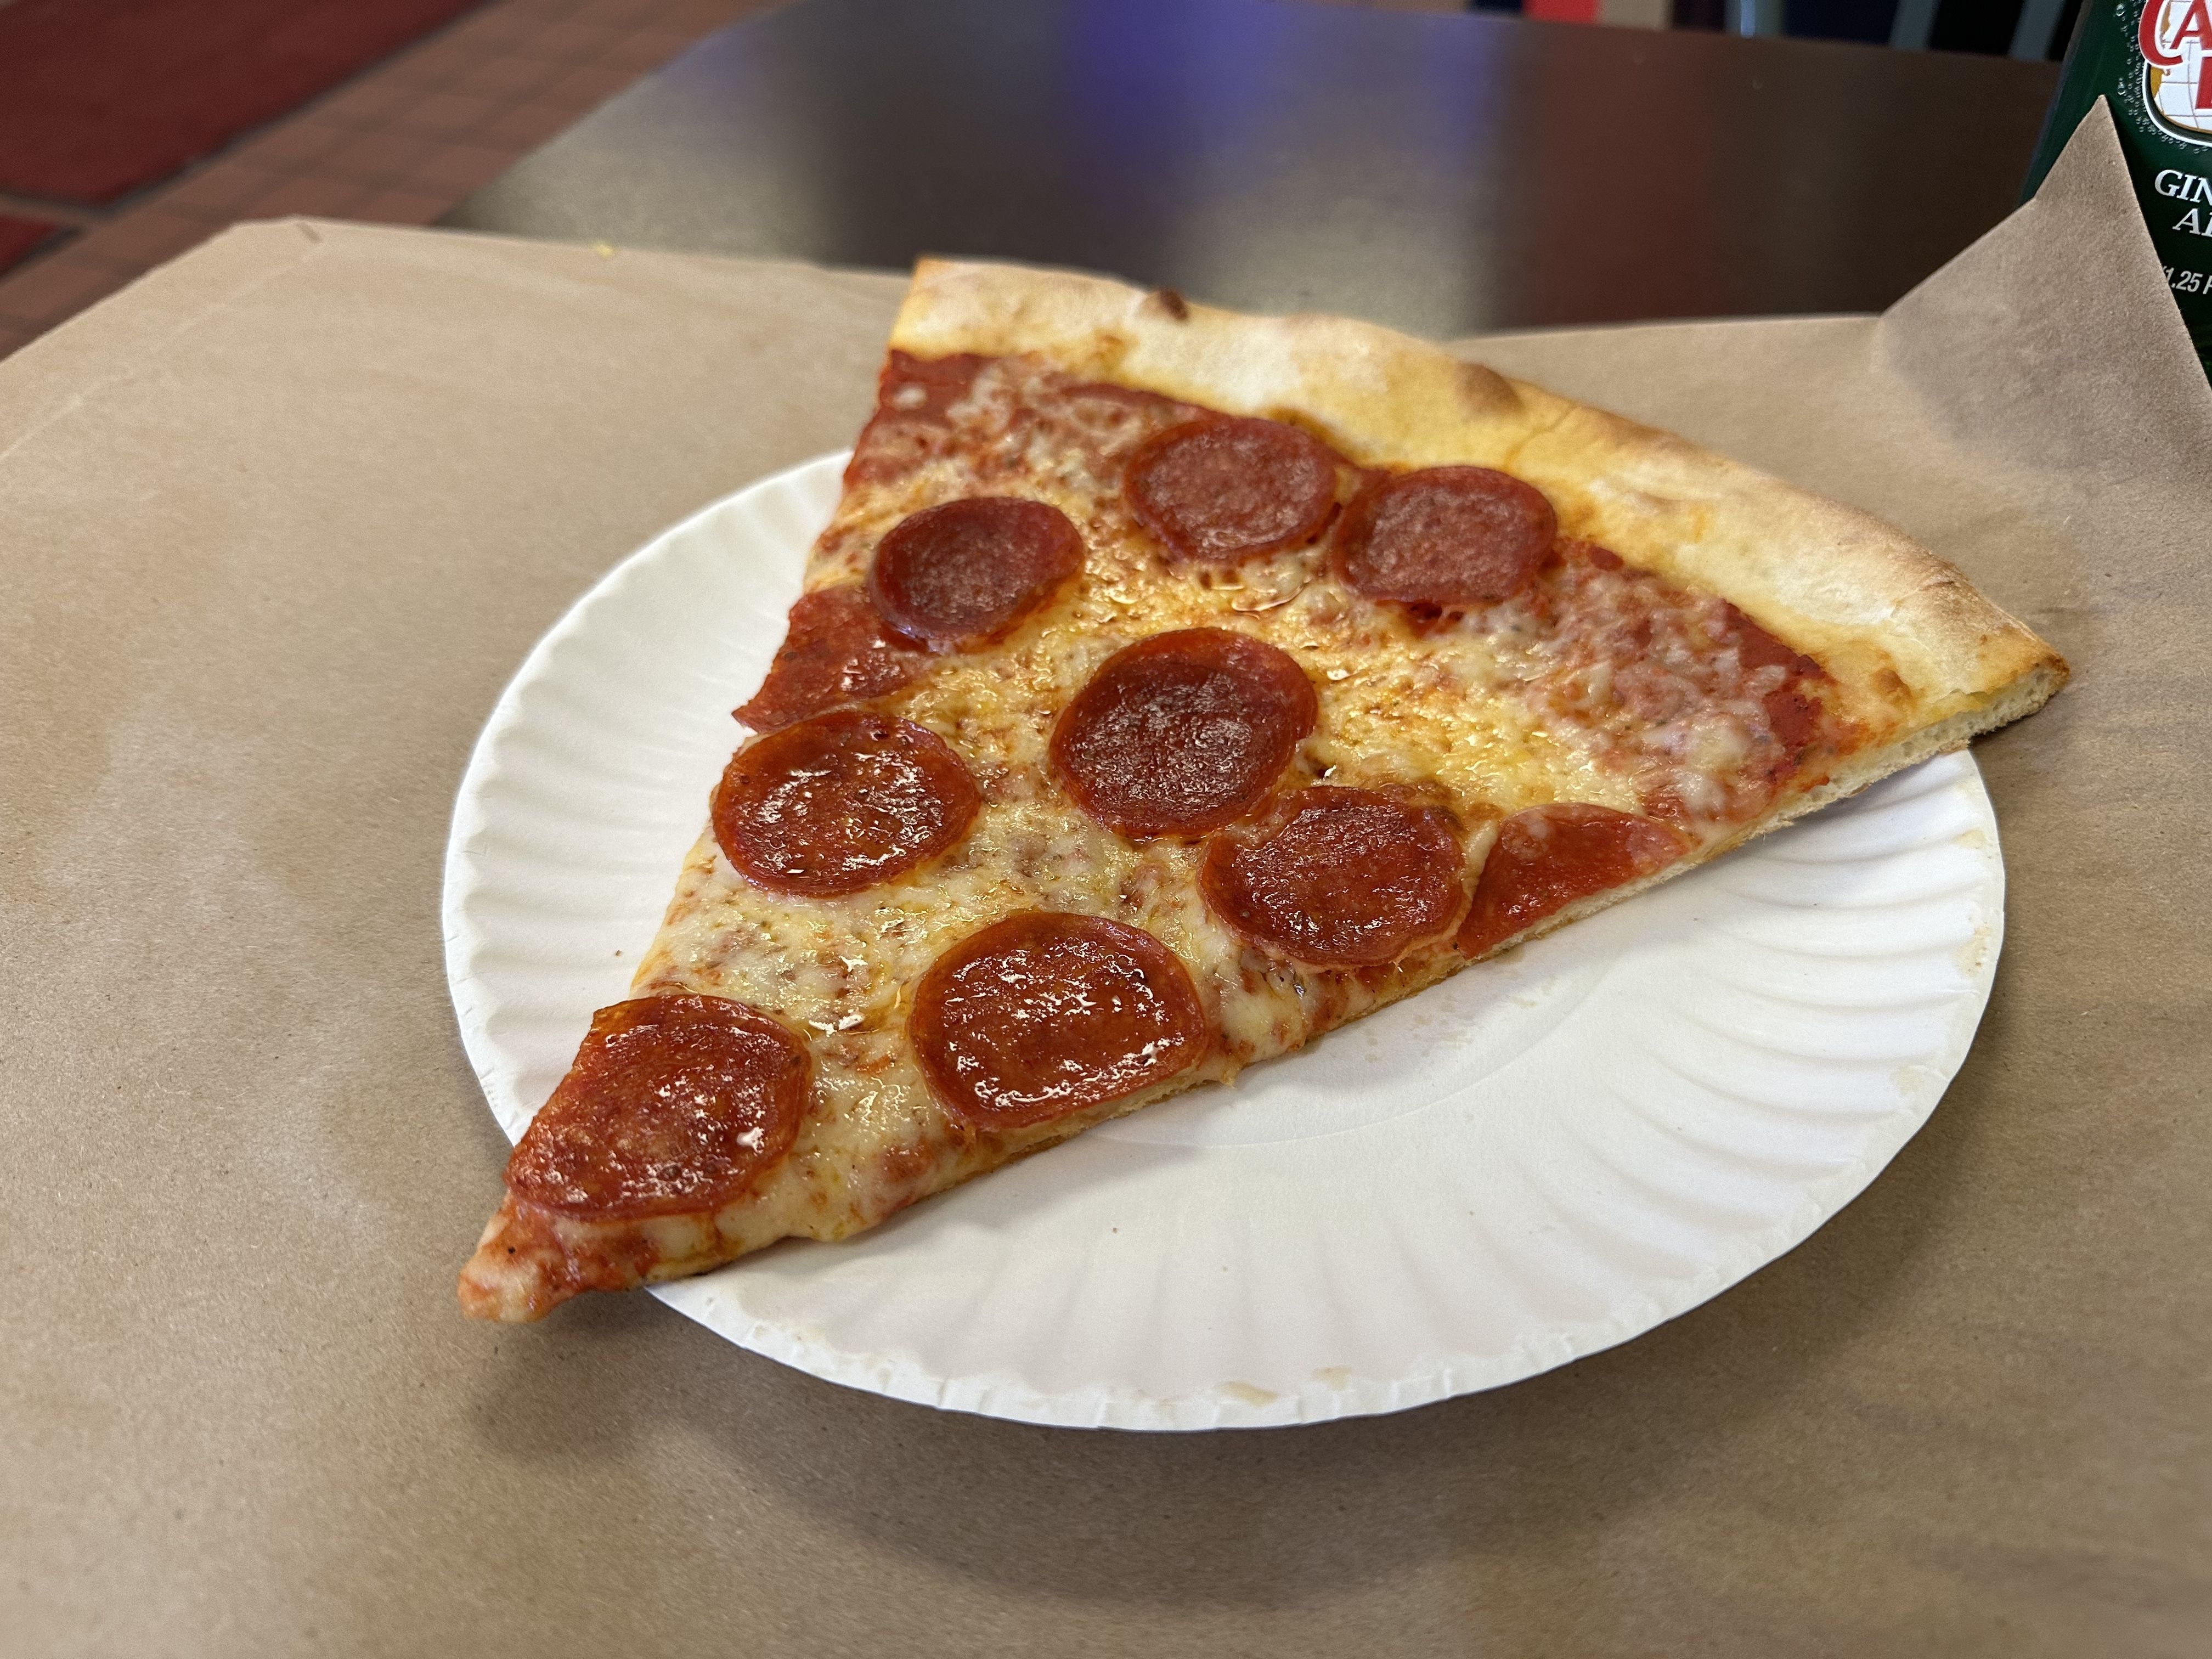 A slice of pepperoni pizza.